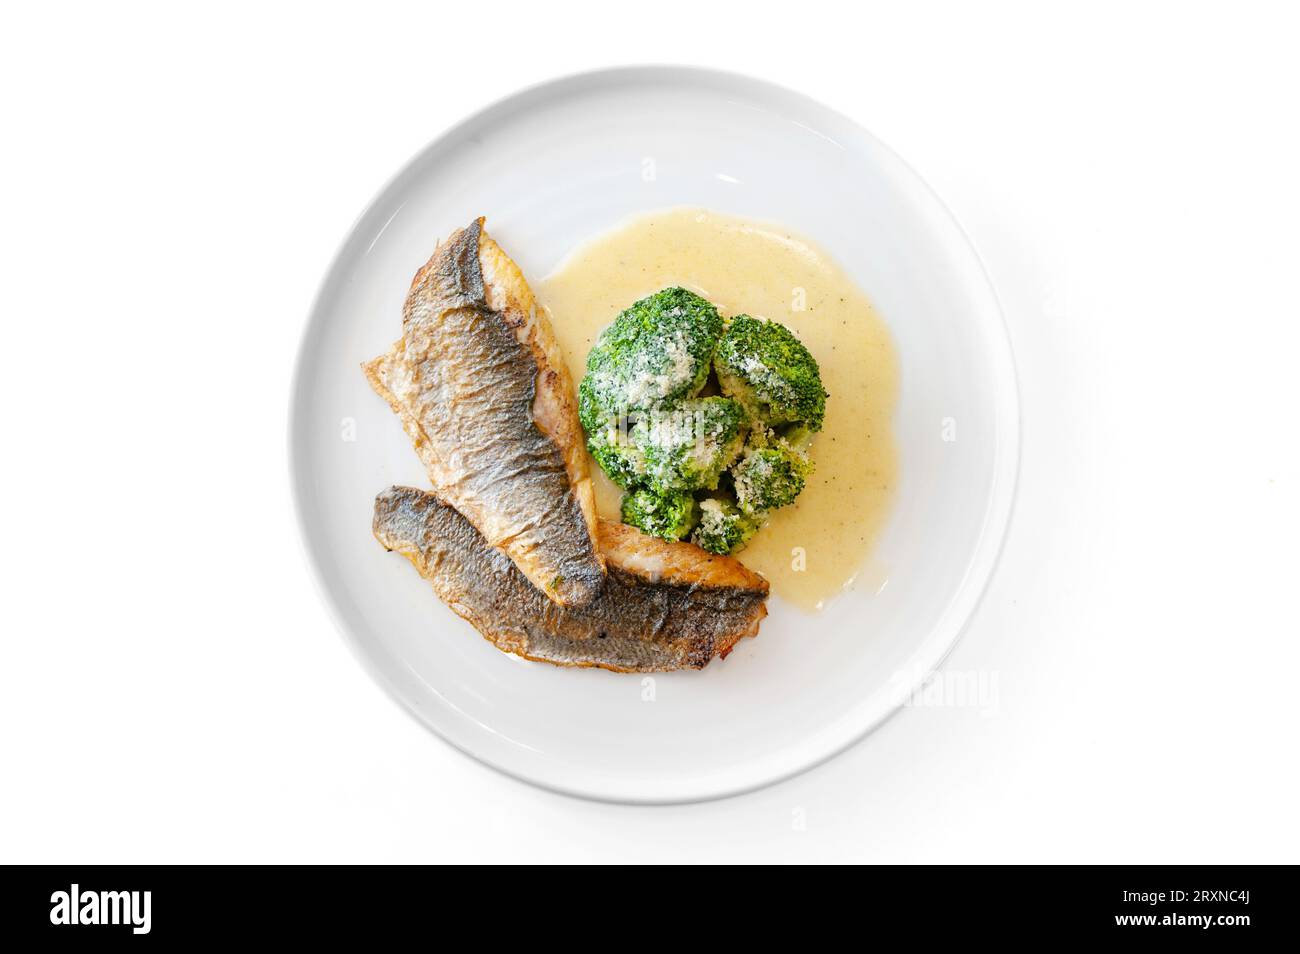 Dorado or sea bass fillet in cream sauce with broccoli on a white plate. High quality photo Stock Photo